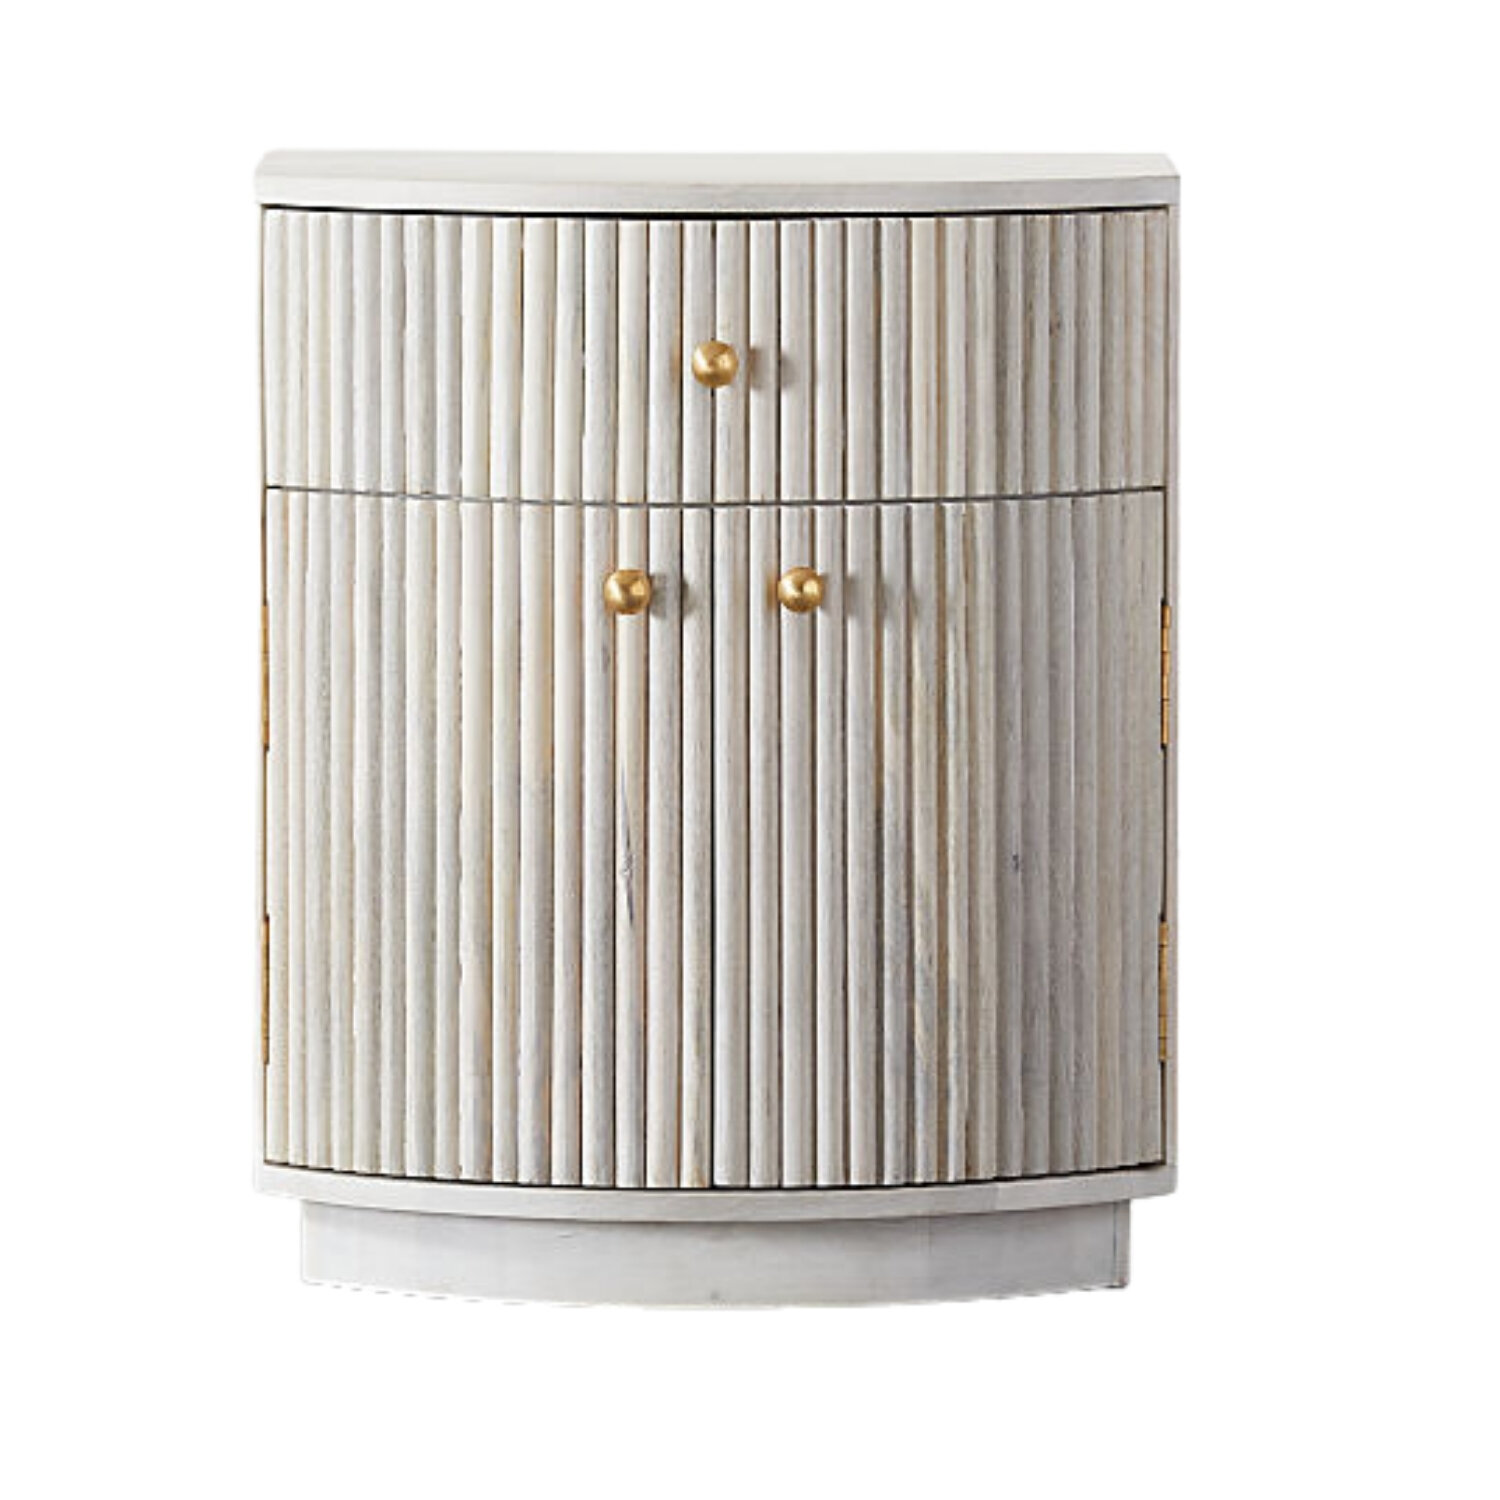 Cameo Curved Nightstand, Cb2, $499